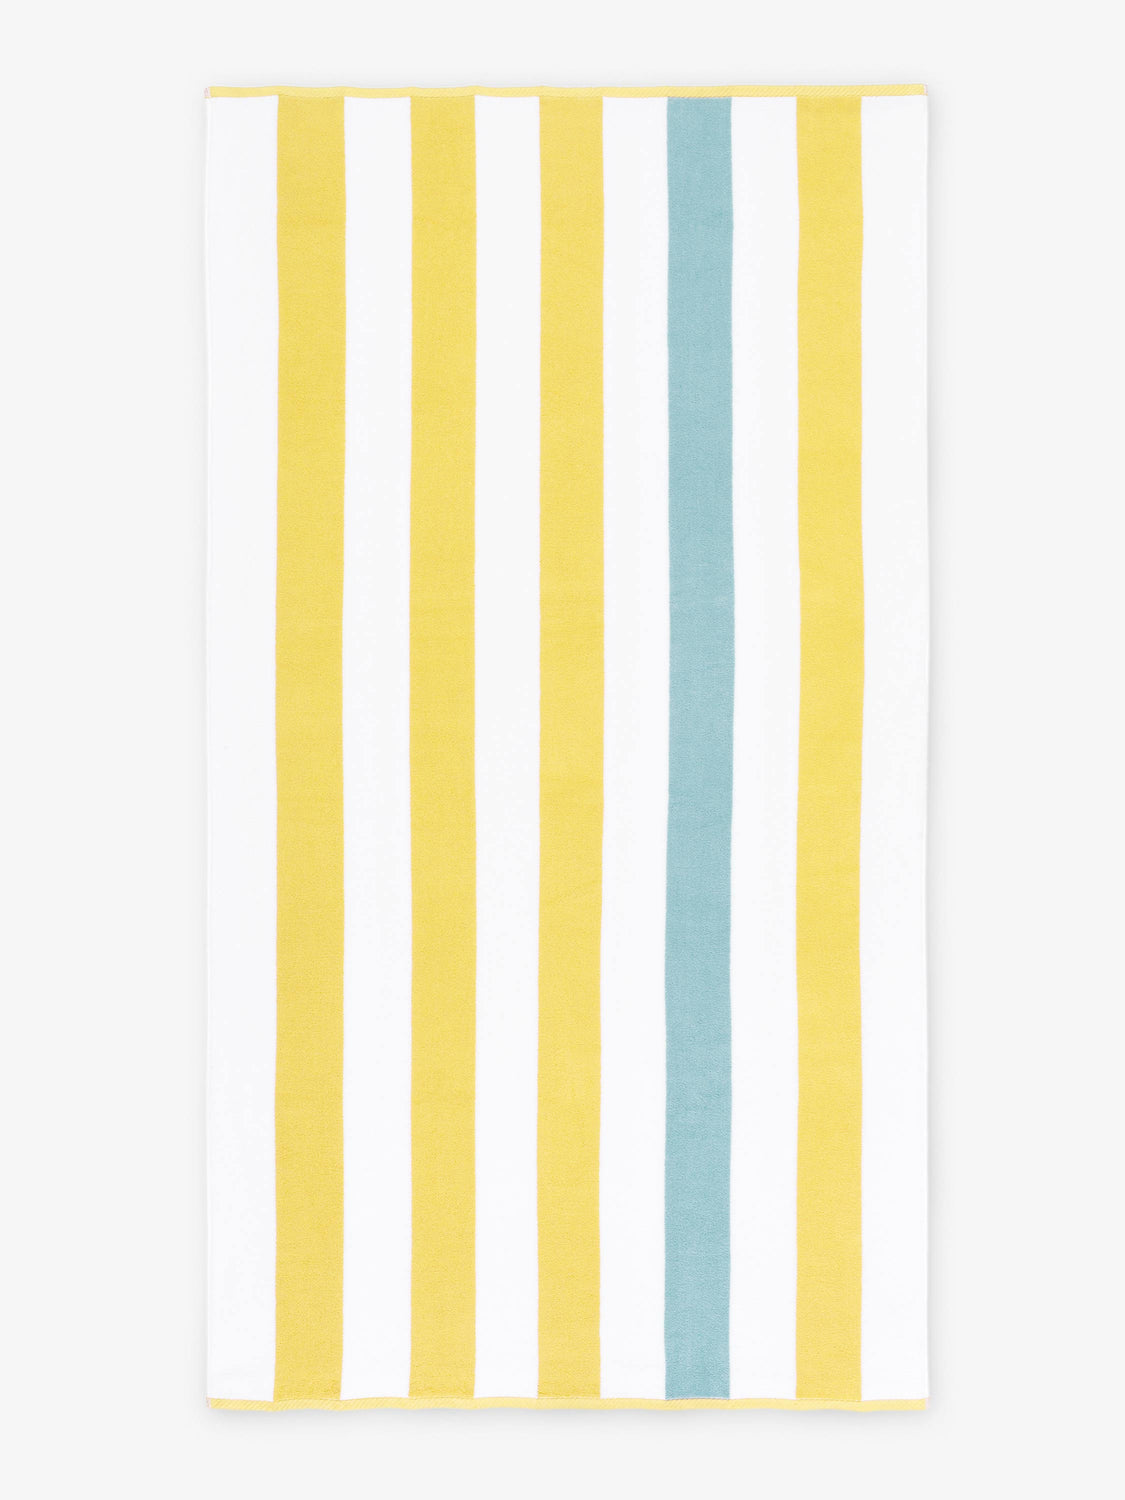 An oversized, yellow, green, and white striped cabana beach towel laid out.